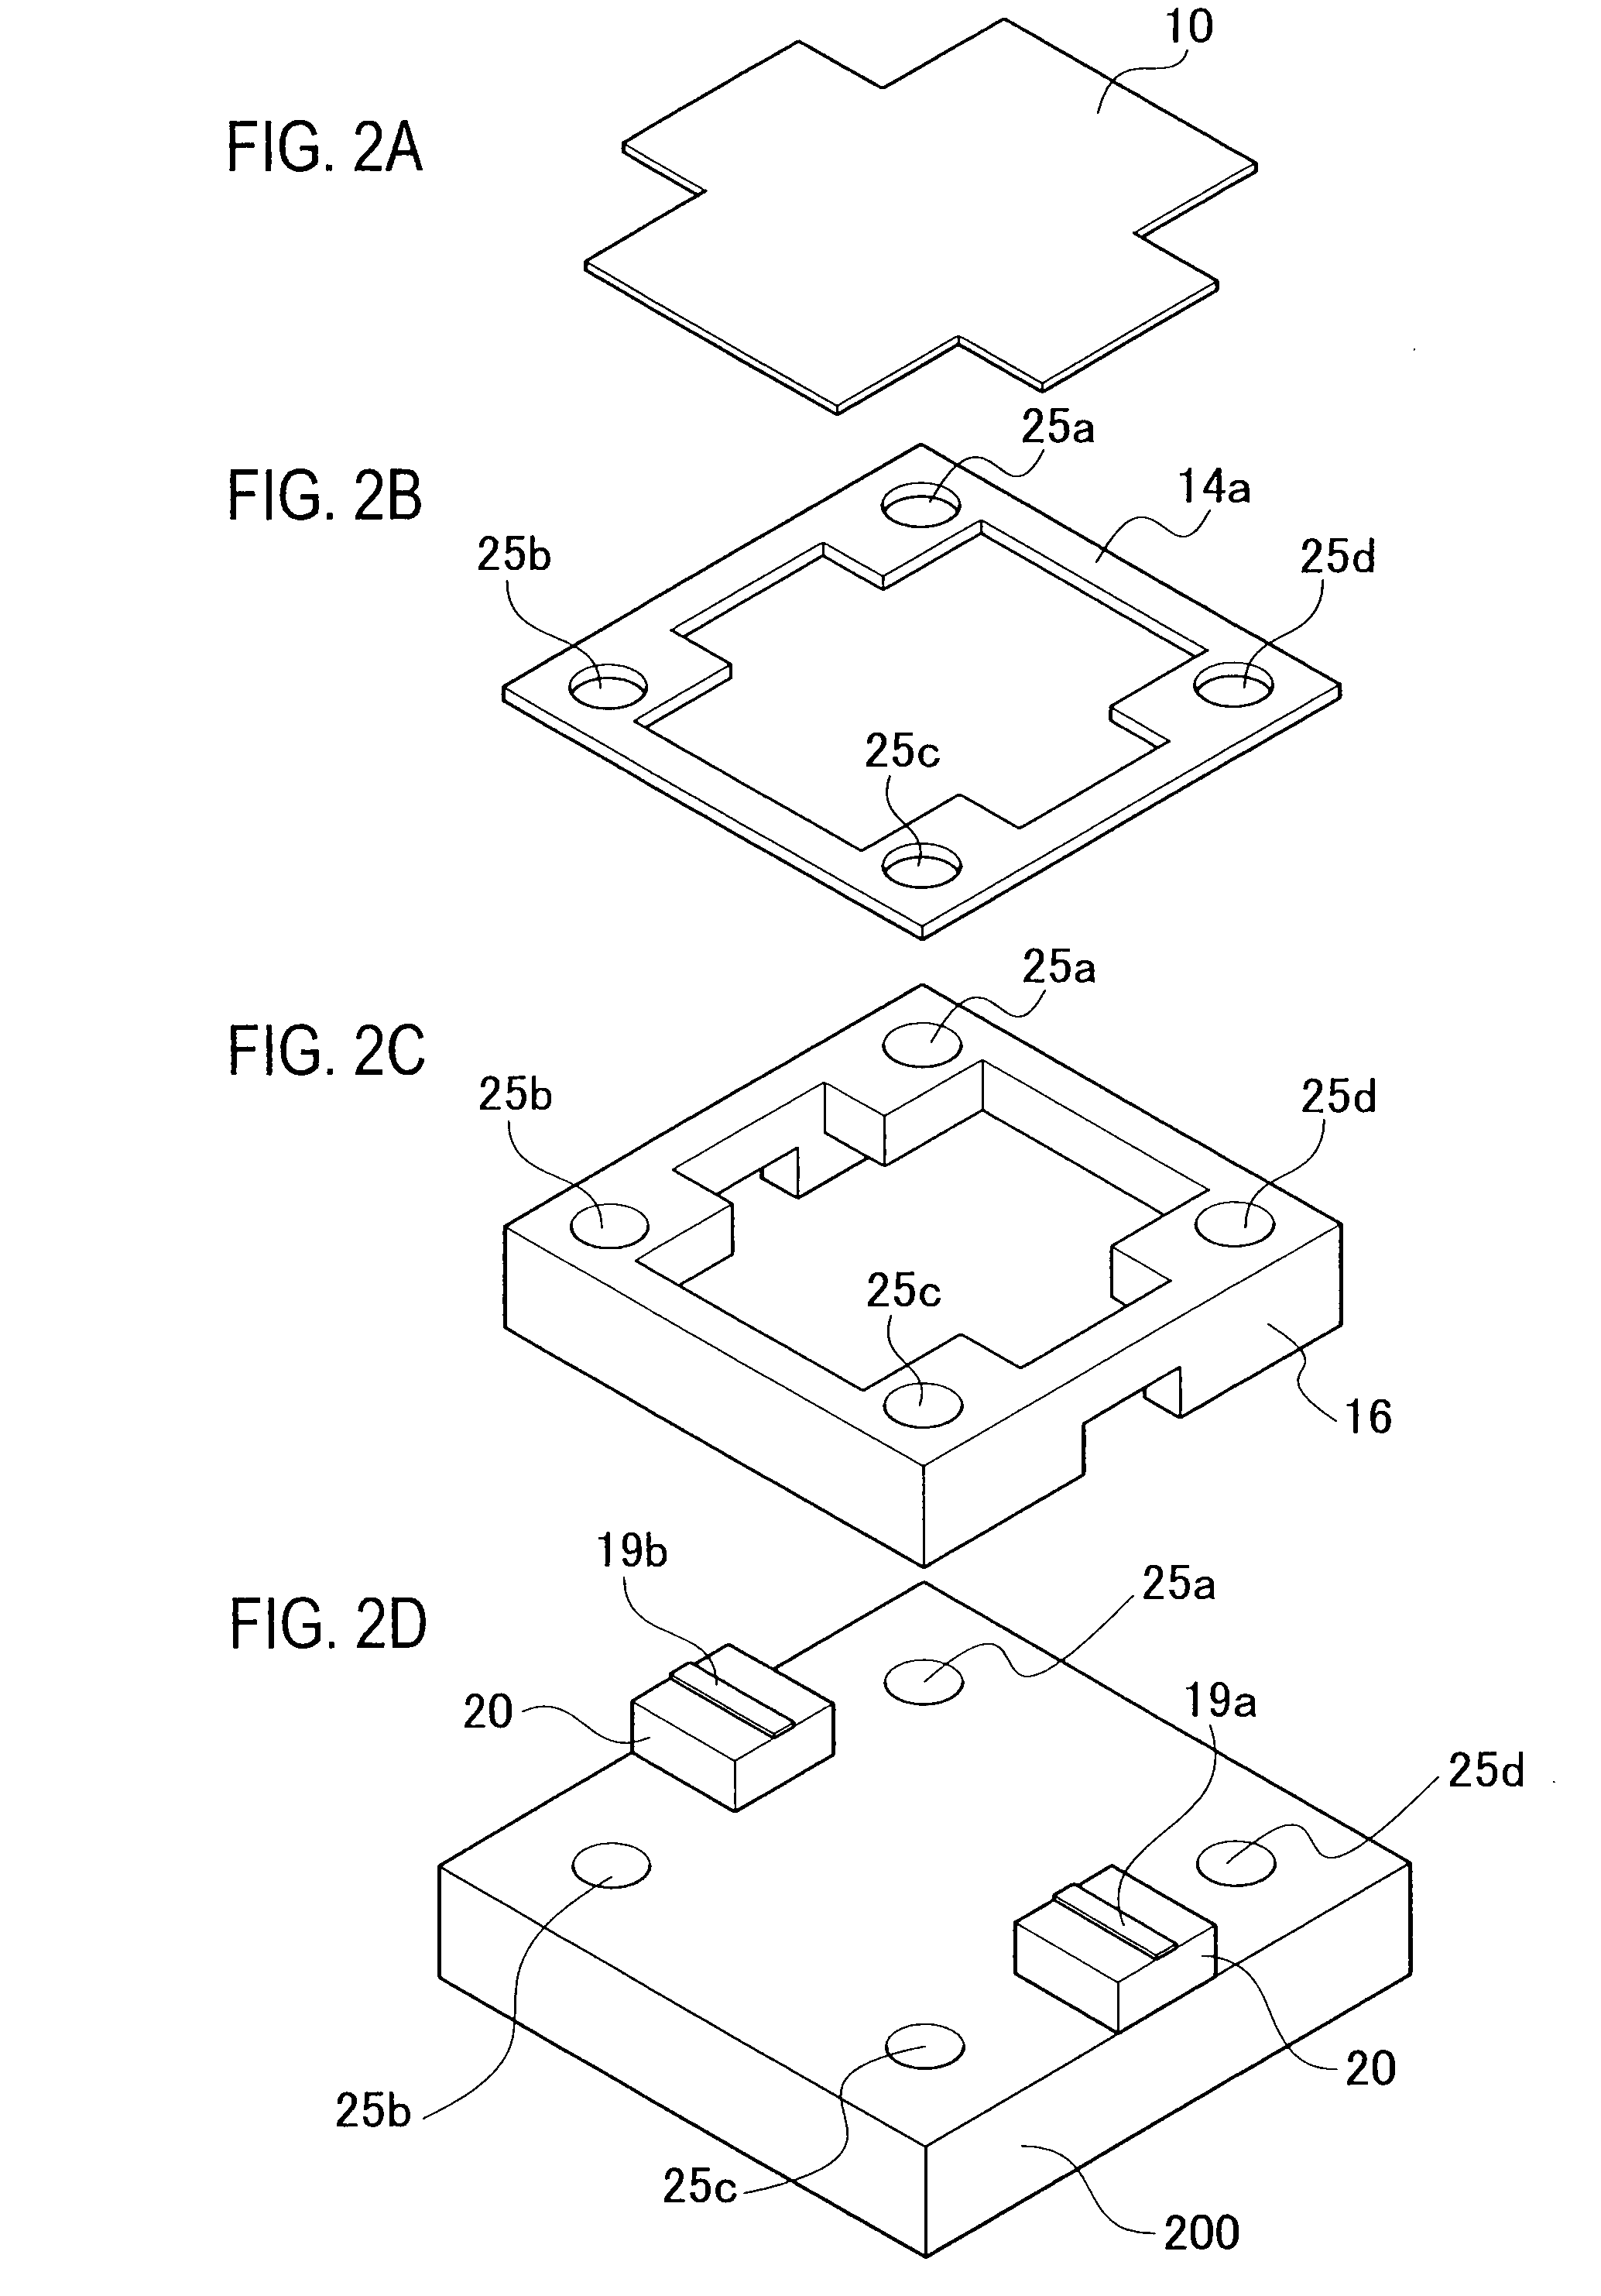 Package, and fabrication method for the package